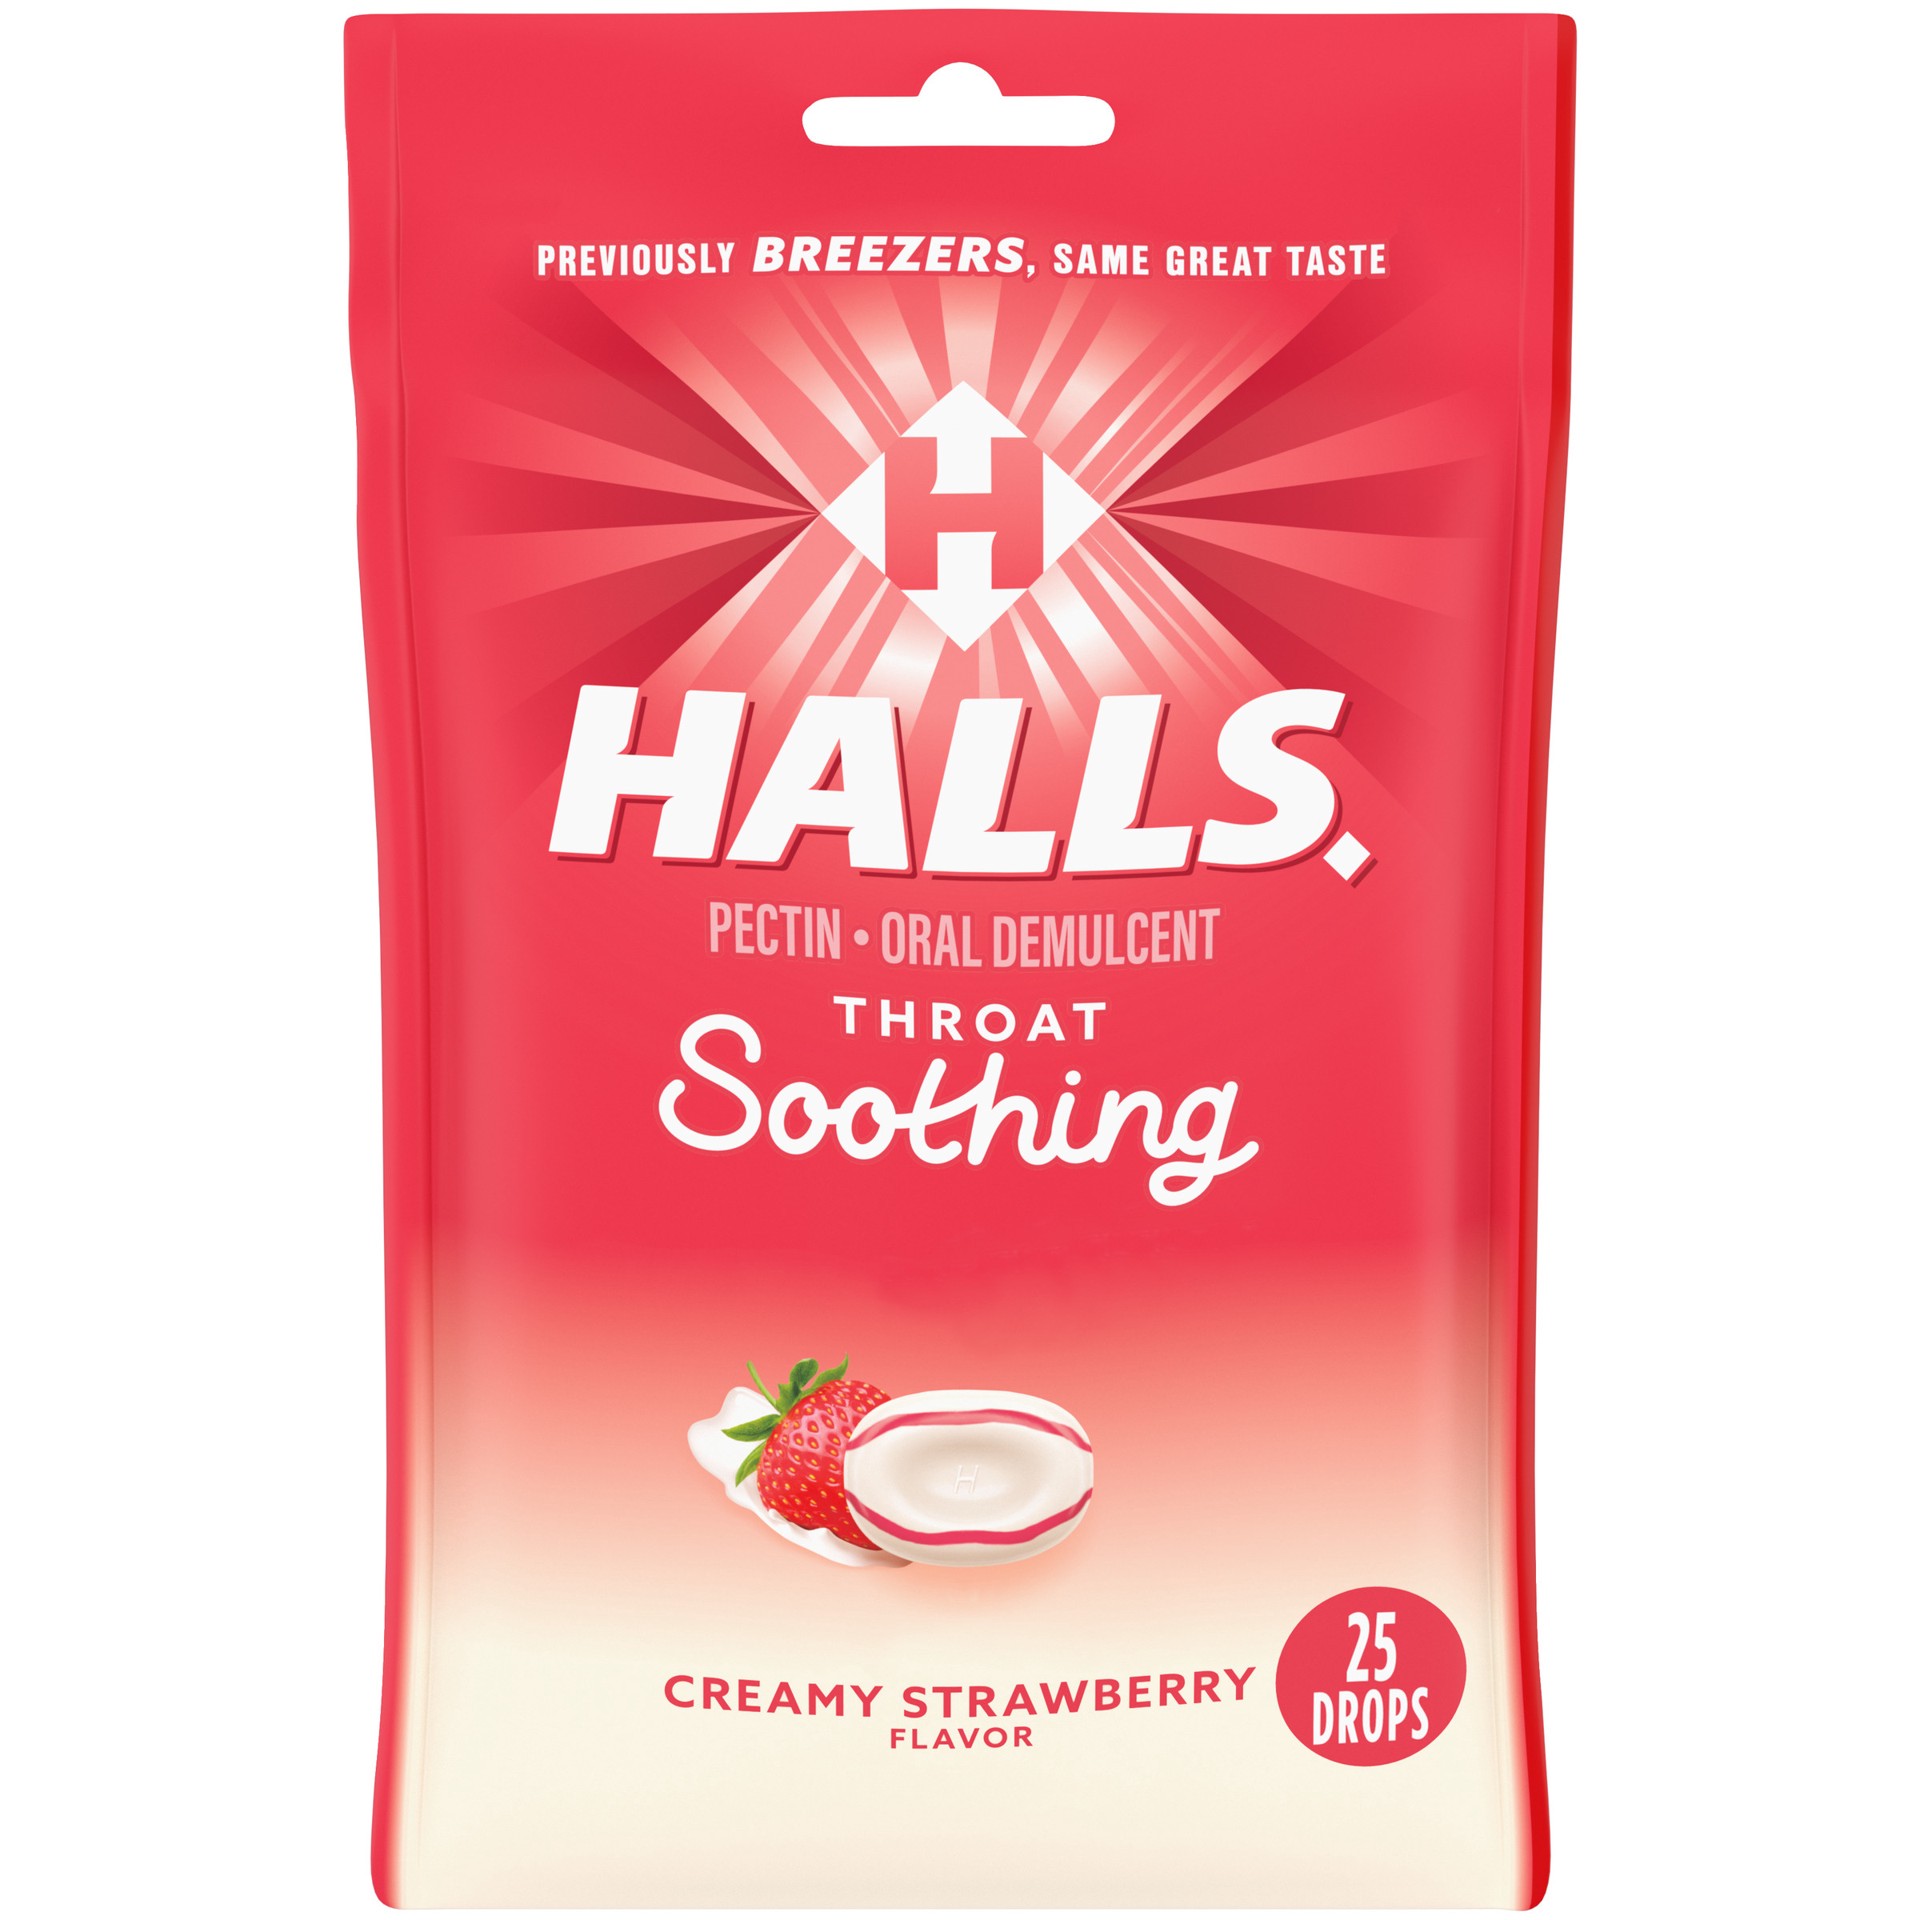 slide 1 of 9, HALLS Throat Soothing (Formerly HALLS Breezers) Creamy Strawberry Throat Drops, 25 Drops, 0.19 lb